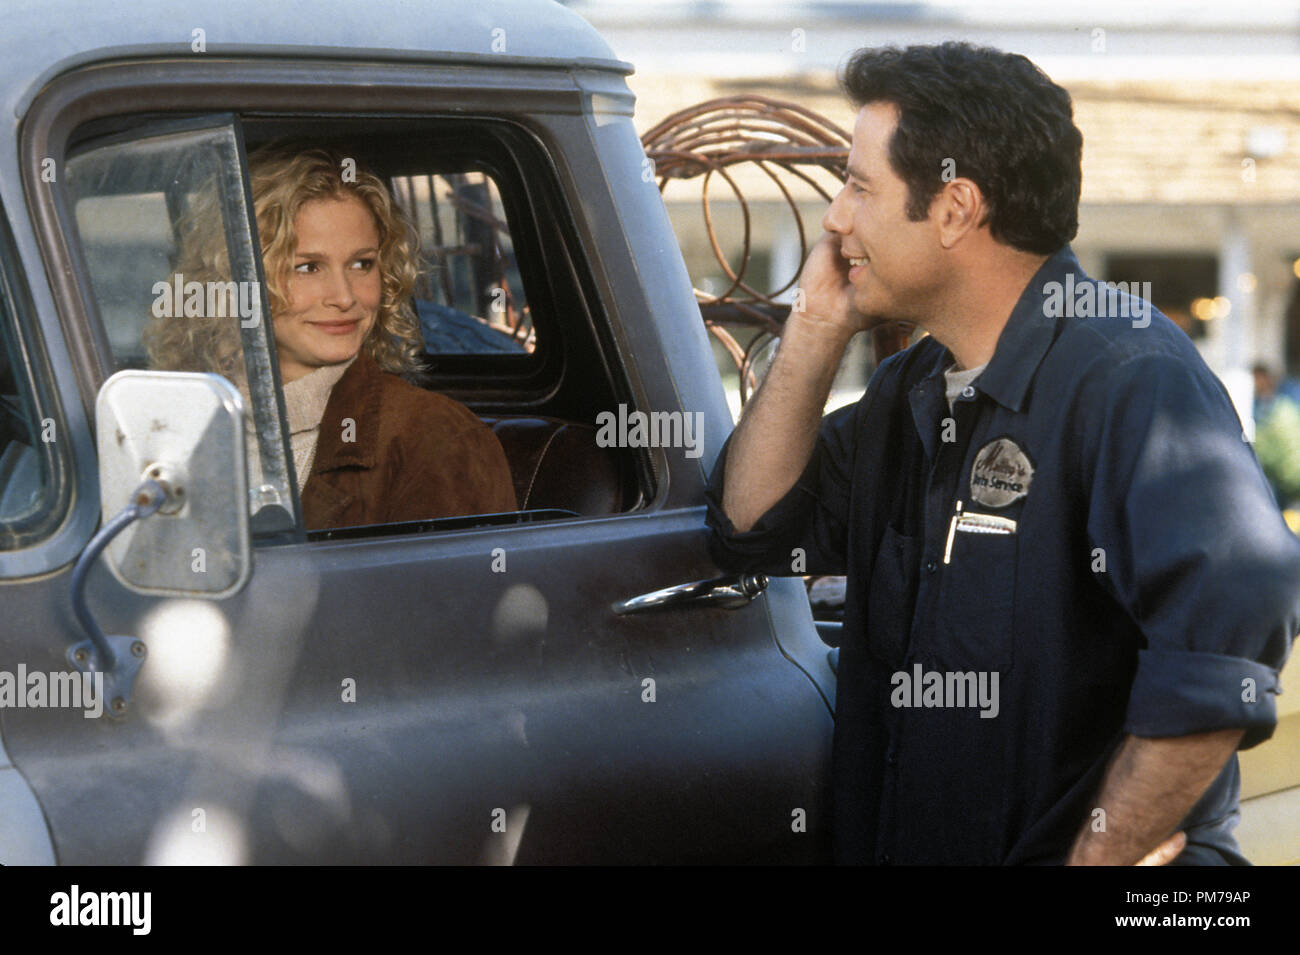 Film Still from 'Phenomenon' Kyra Sedgwick, John Travolta © 1996 Touchstone Pictures Photo Credit: Zade Rosenthal  File Reference # 31042299THA  For Editorial Use Only - All Rights Reserved Stock Photo